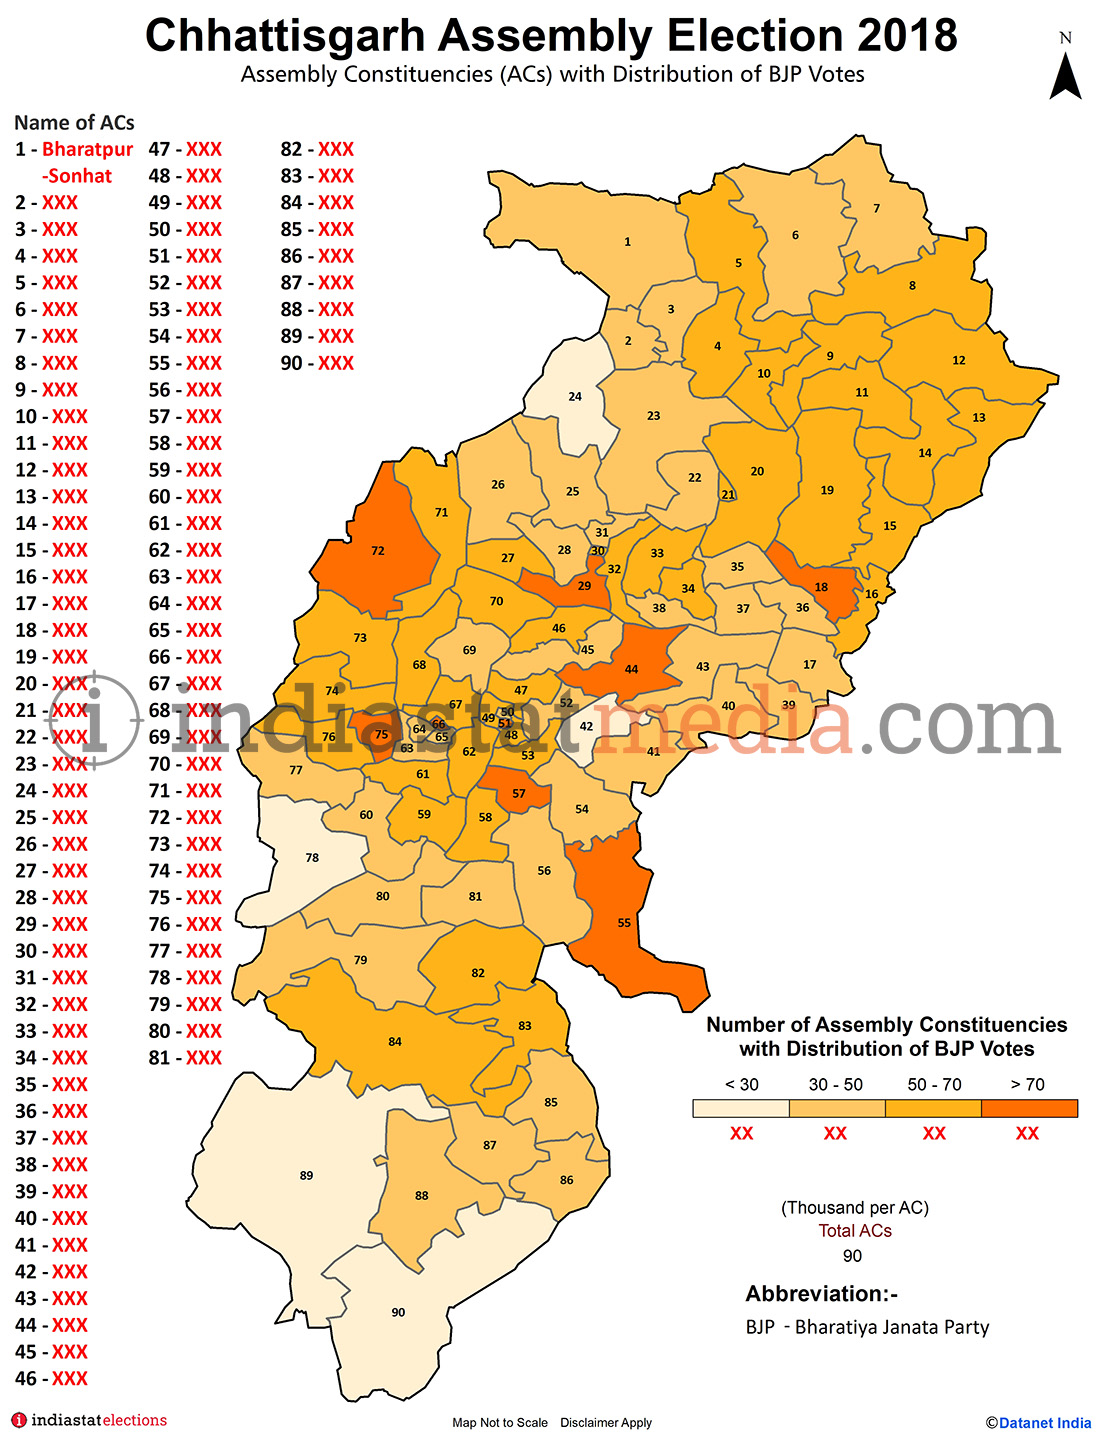 Distribution of BJP Votes by Constituencies in Chhattisgarh (Assembly Election - 2018)